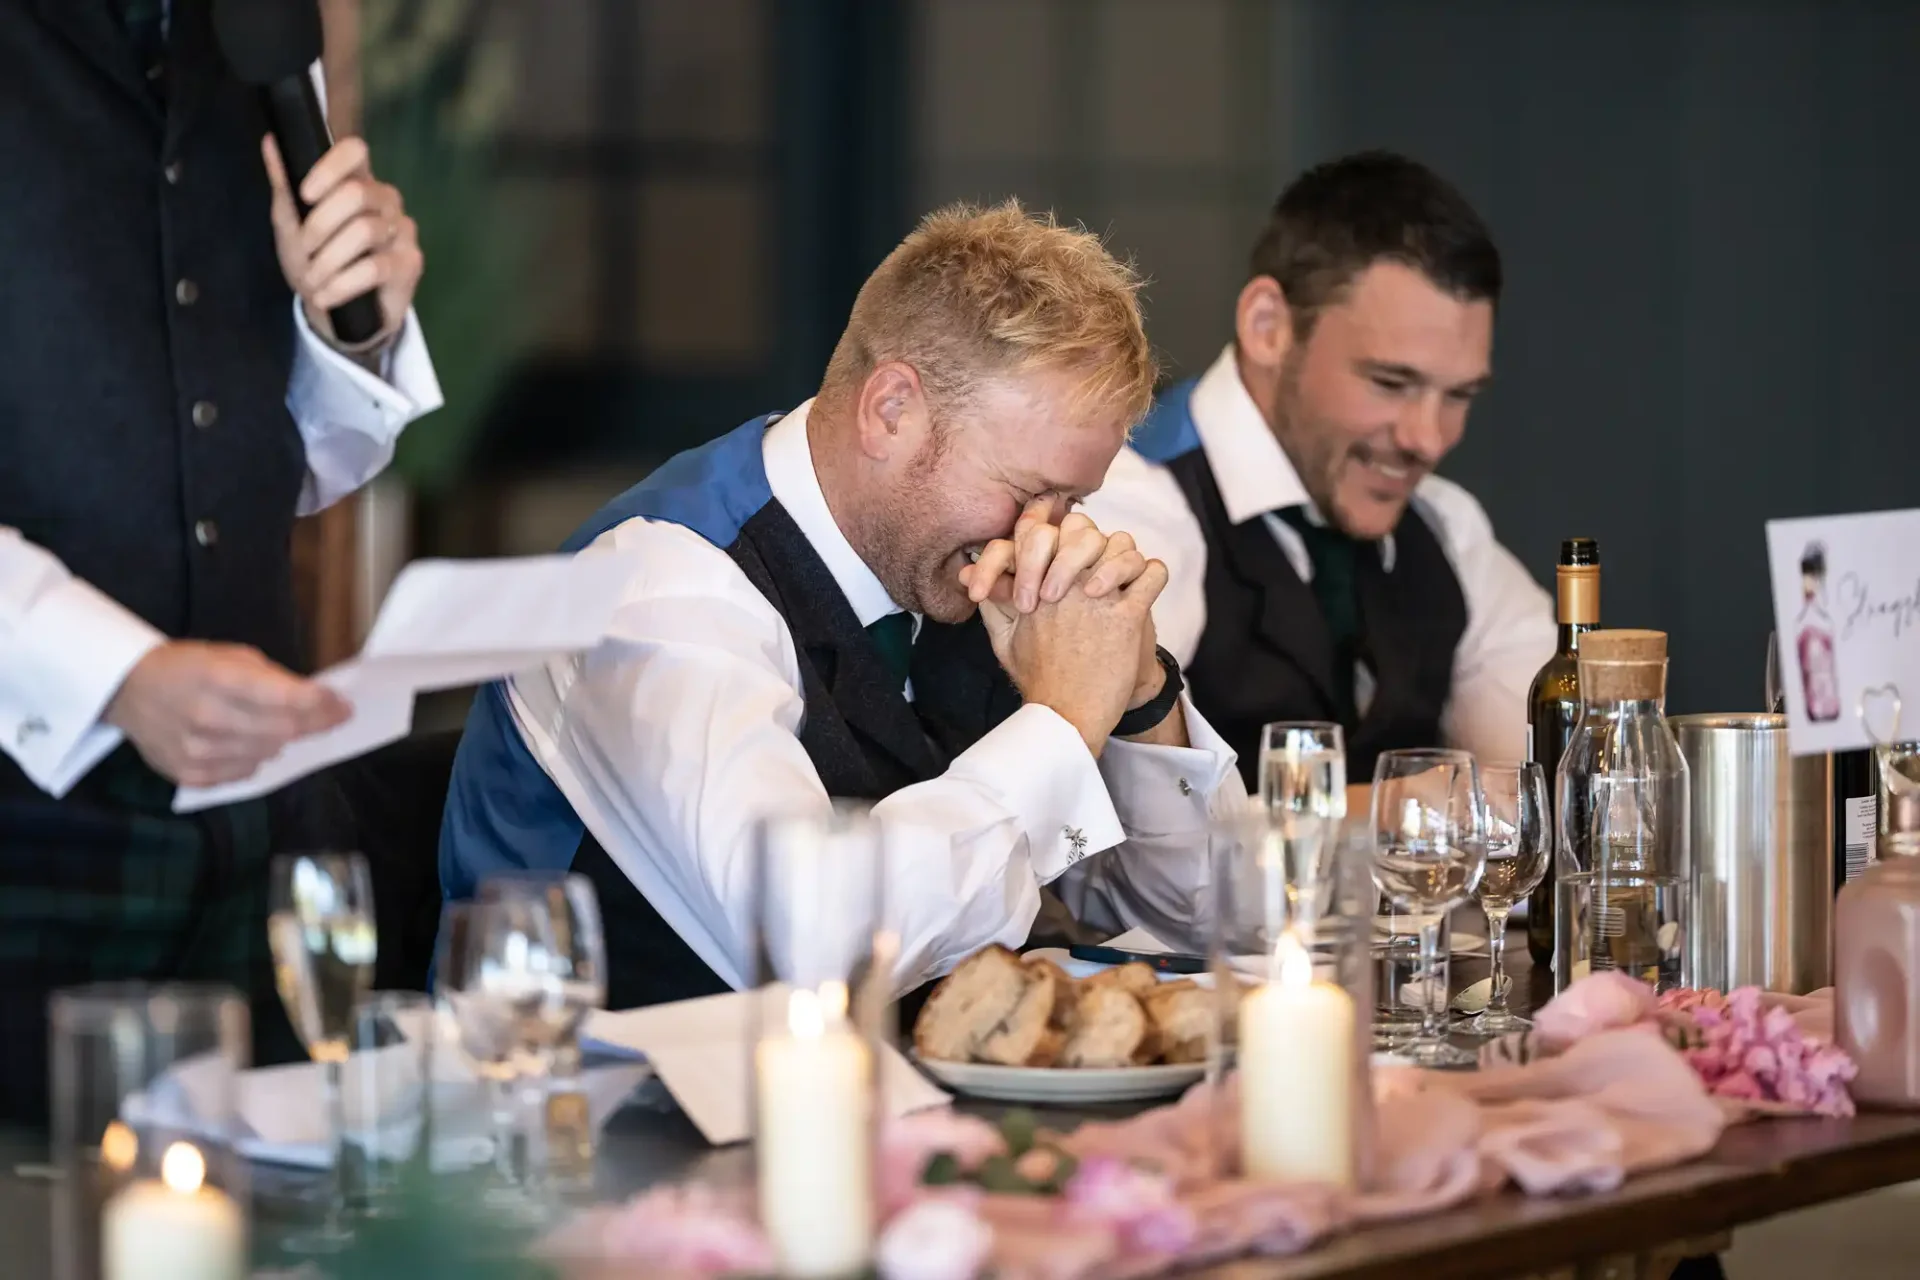 A man in a vest laughs with his face in his hands at a dining table during a speech, with another man smiling beside him.